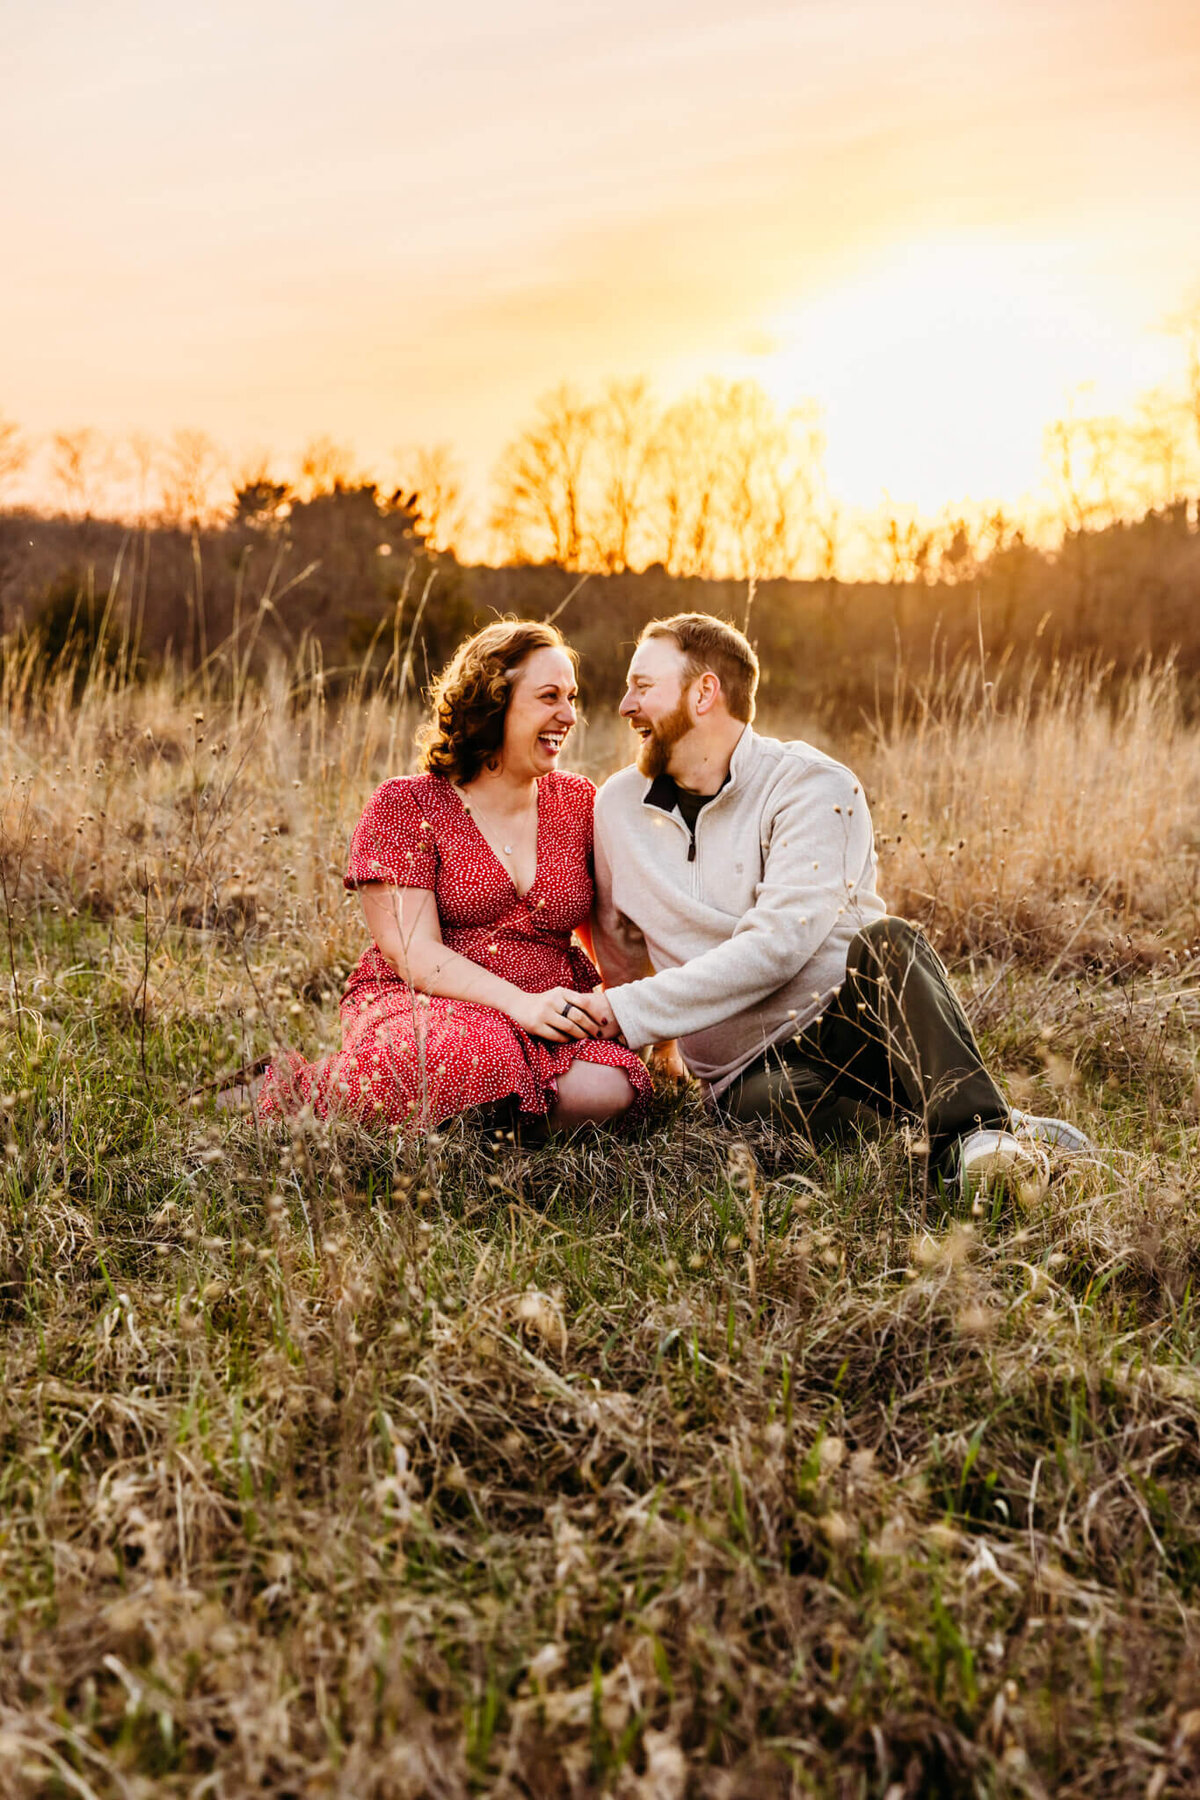 woman in red dress snuggled close to fiance in white sweater in a field